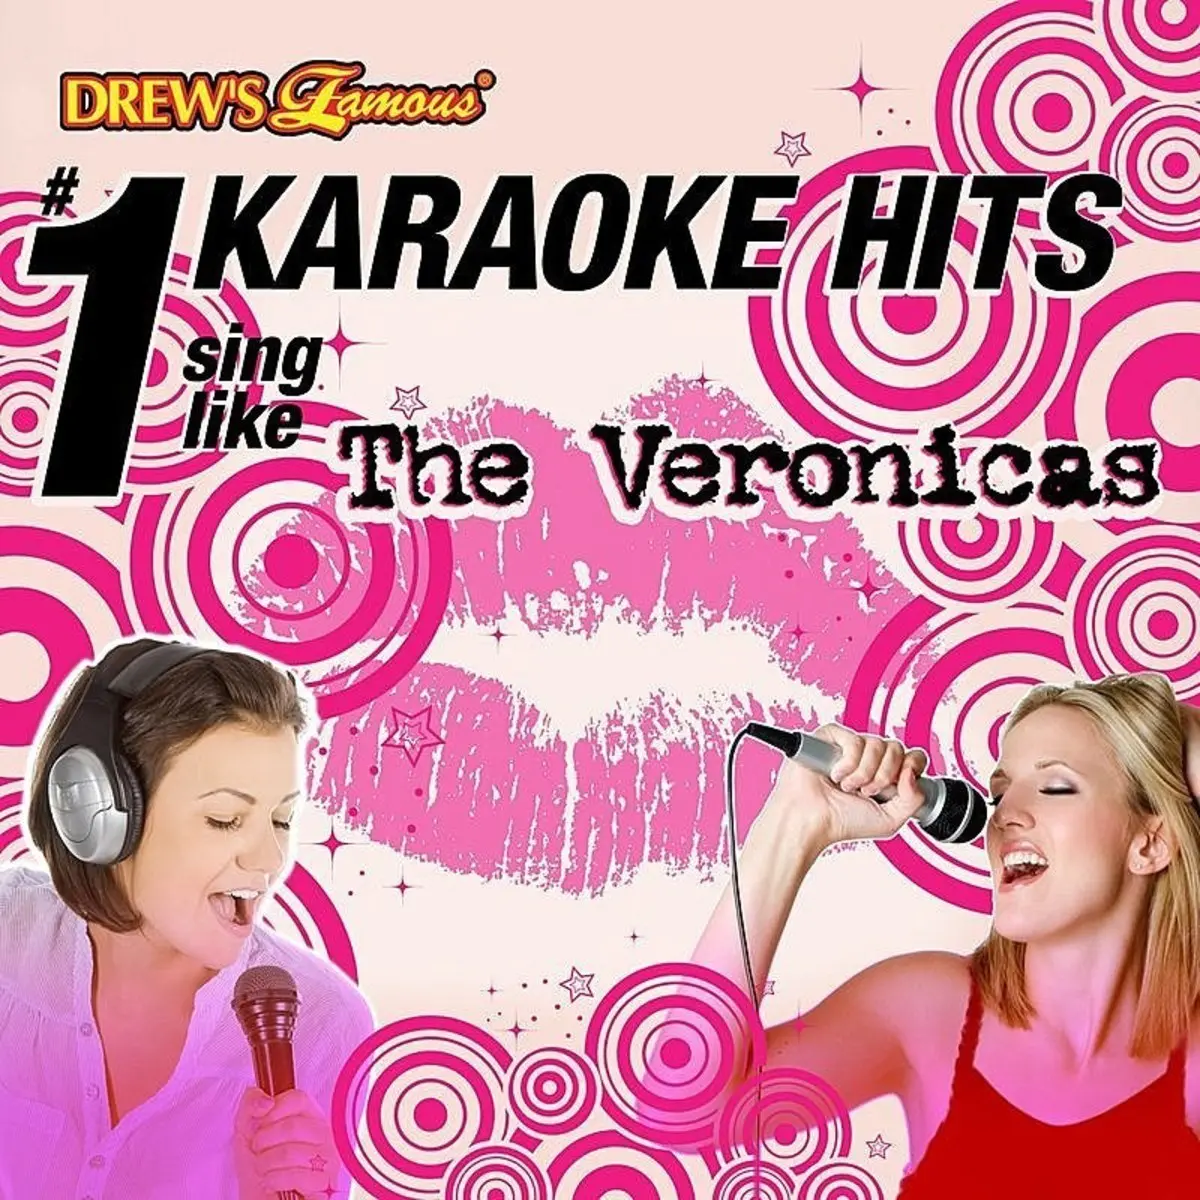 Take Me To The Floor Mp3 Song Download Drew S Famous 1 Karaoke